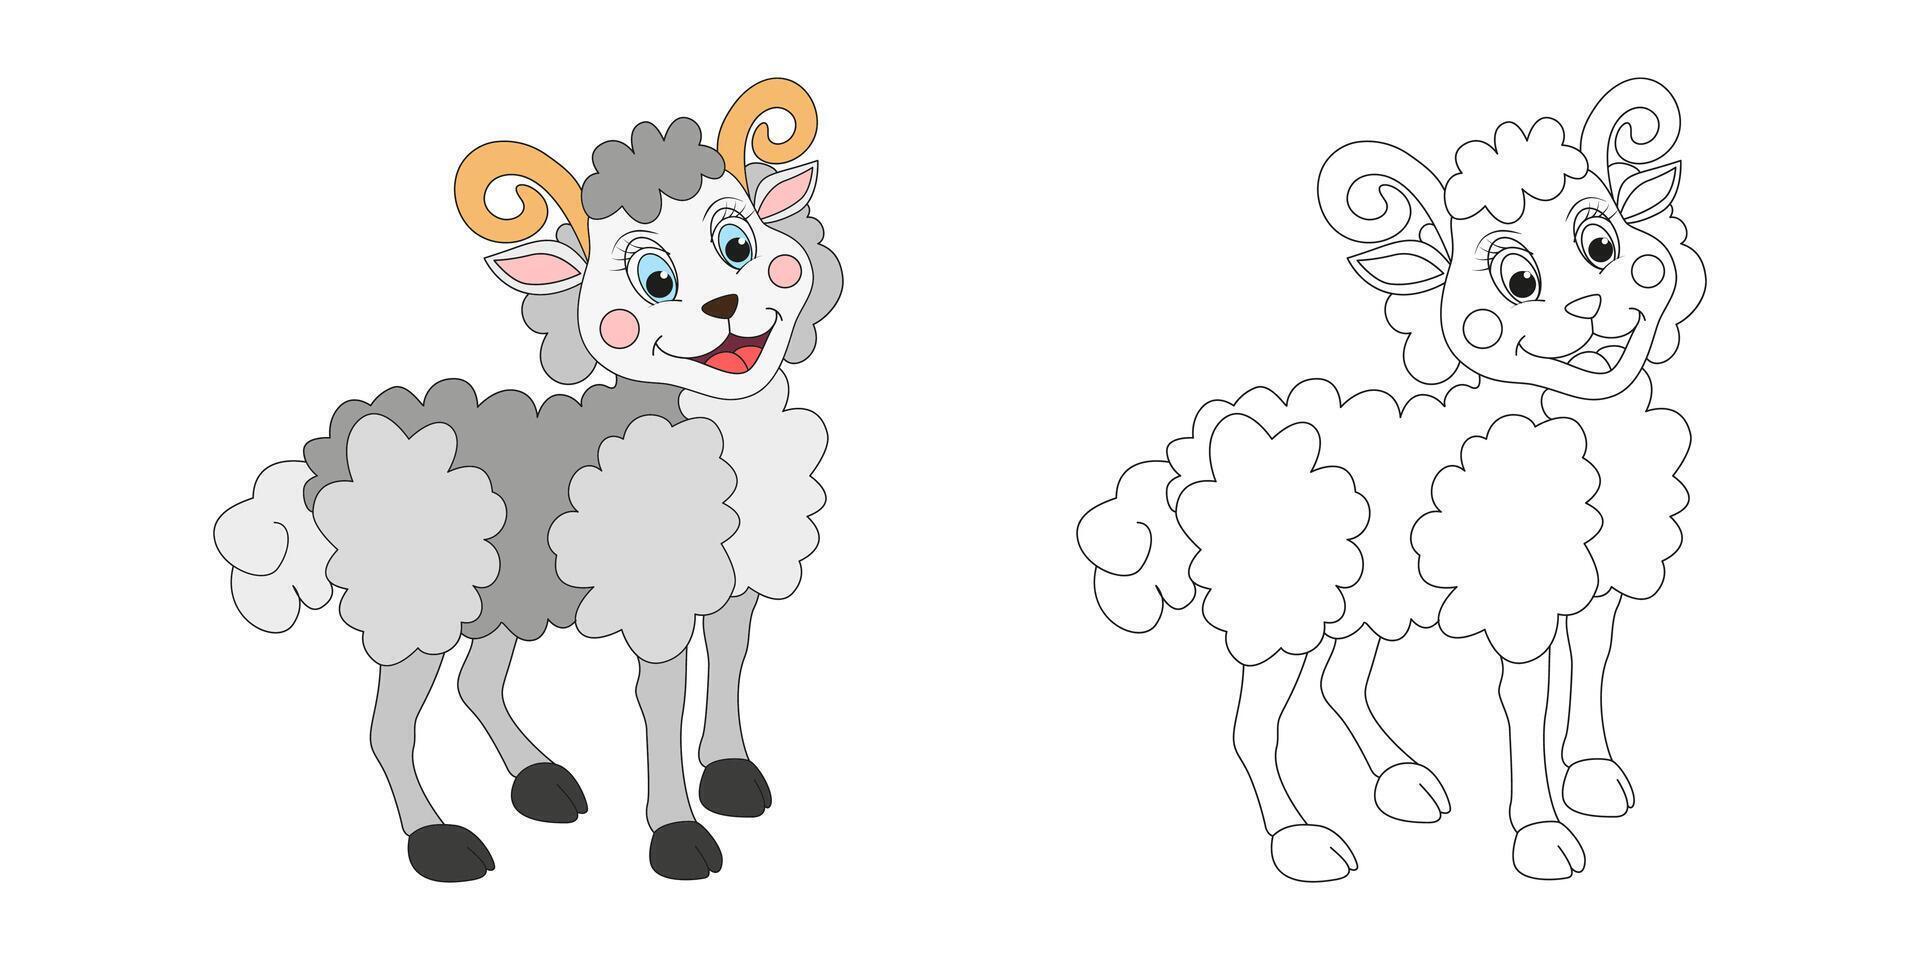 Ram or sheep line and color illustration. Cartoon vector illustration for coloring book.